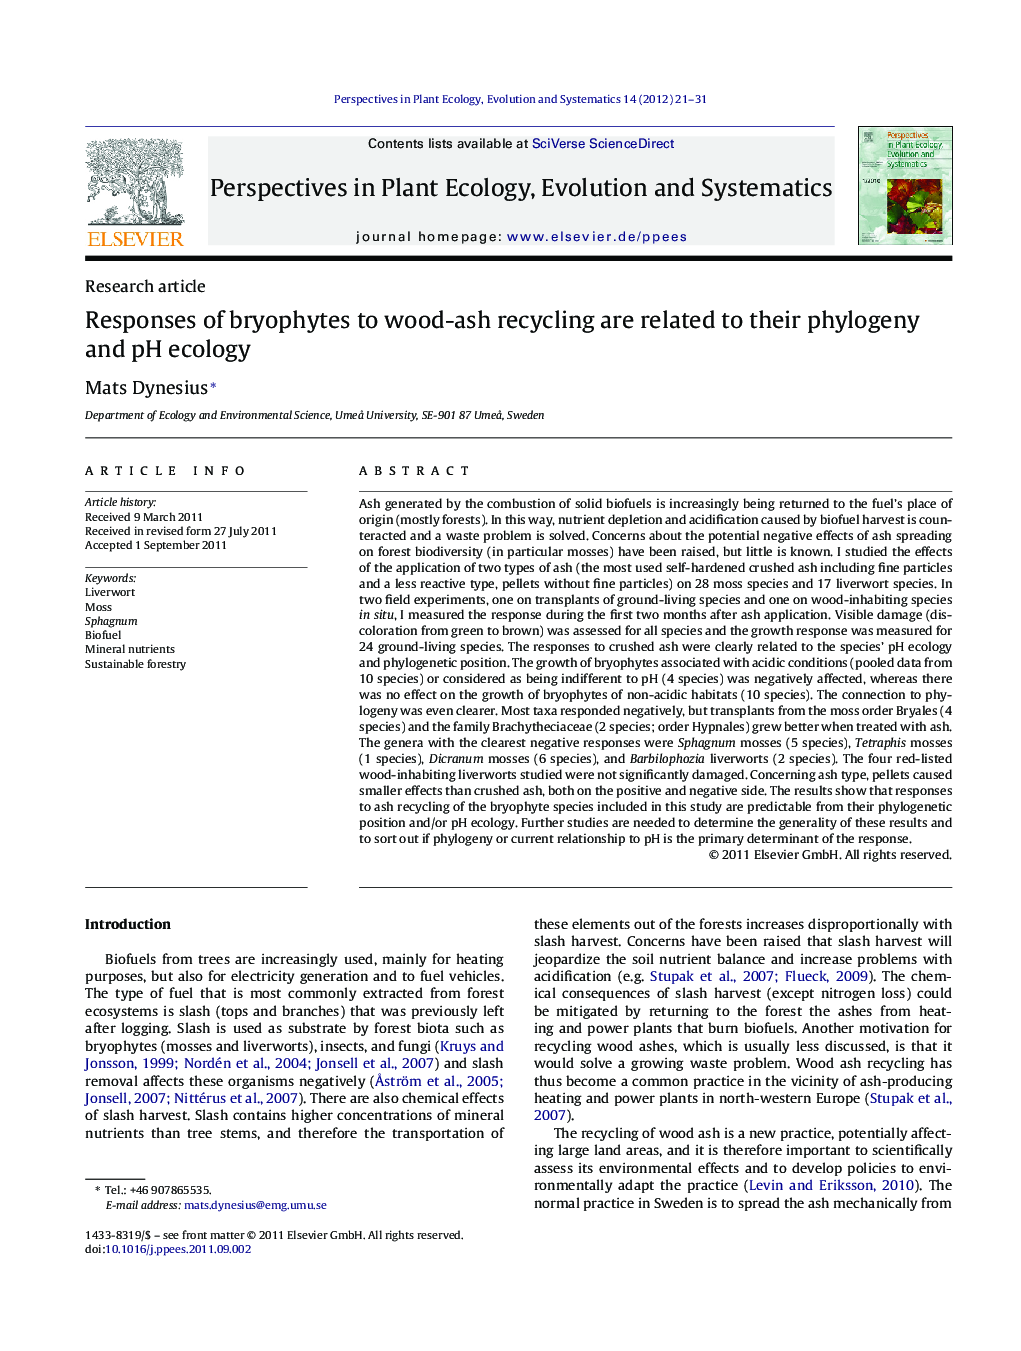 Responses of bryophytes to wood-ash recycling are related to their phylogeny and pH ecology